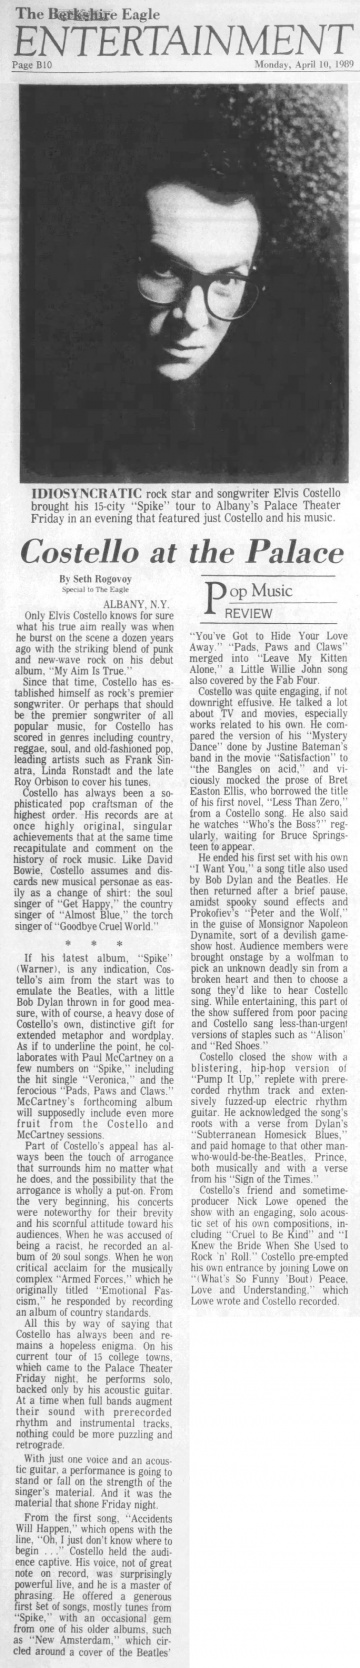 1989-04-10 Berkshire Eagle page B10 clipping 01.jpg